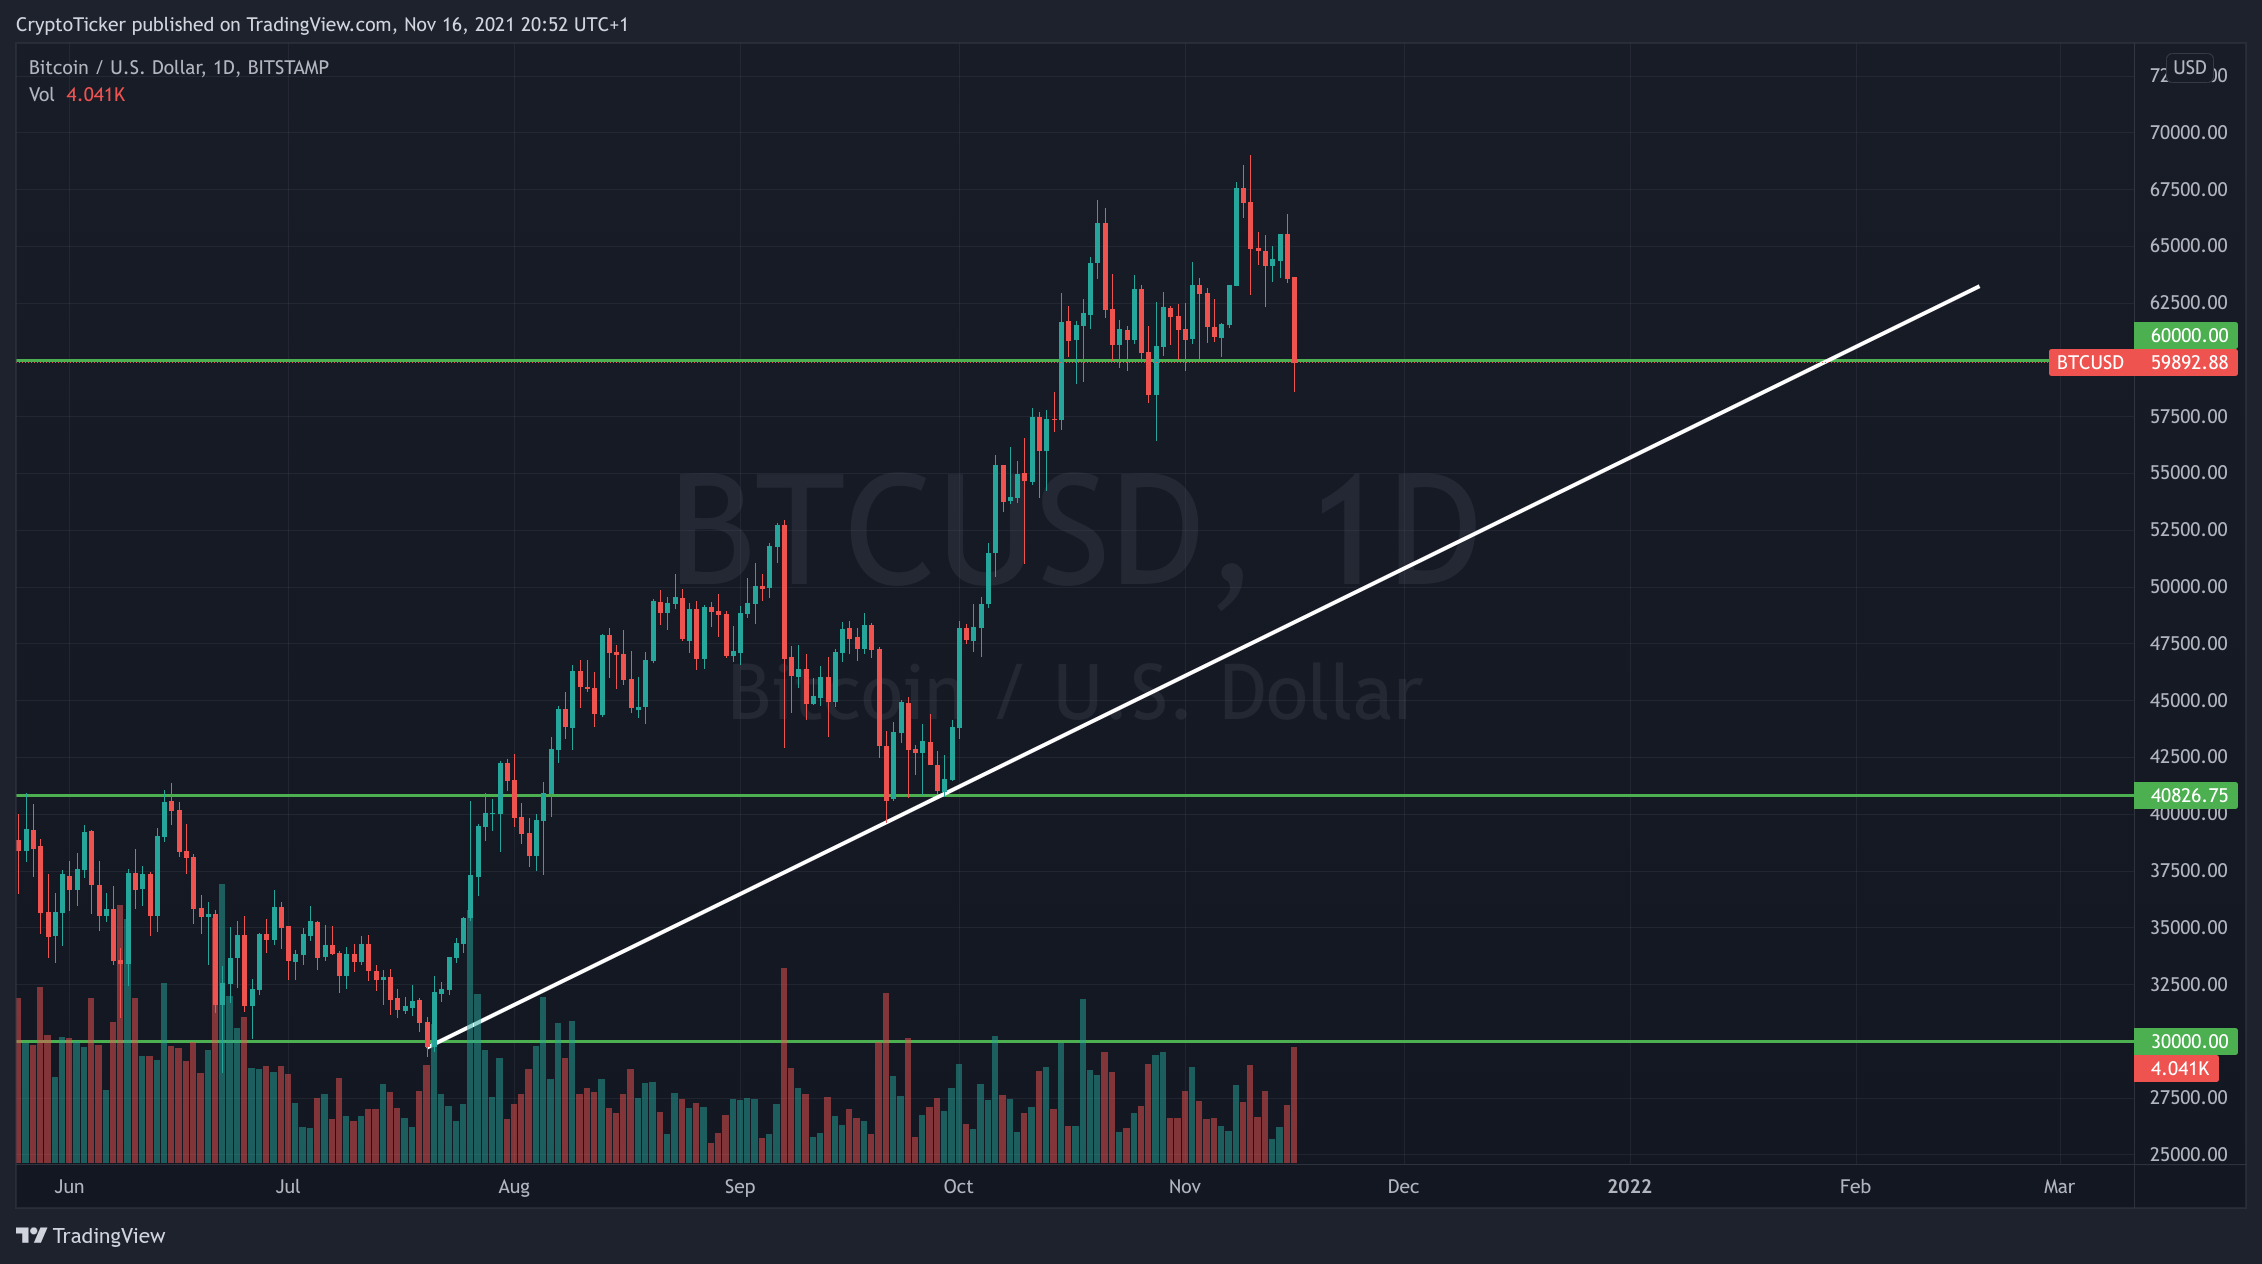 BTC/USD 1-day chart showing the uptrend of BTC